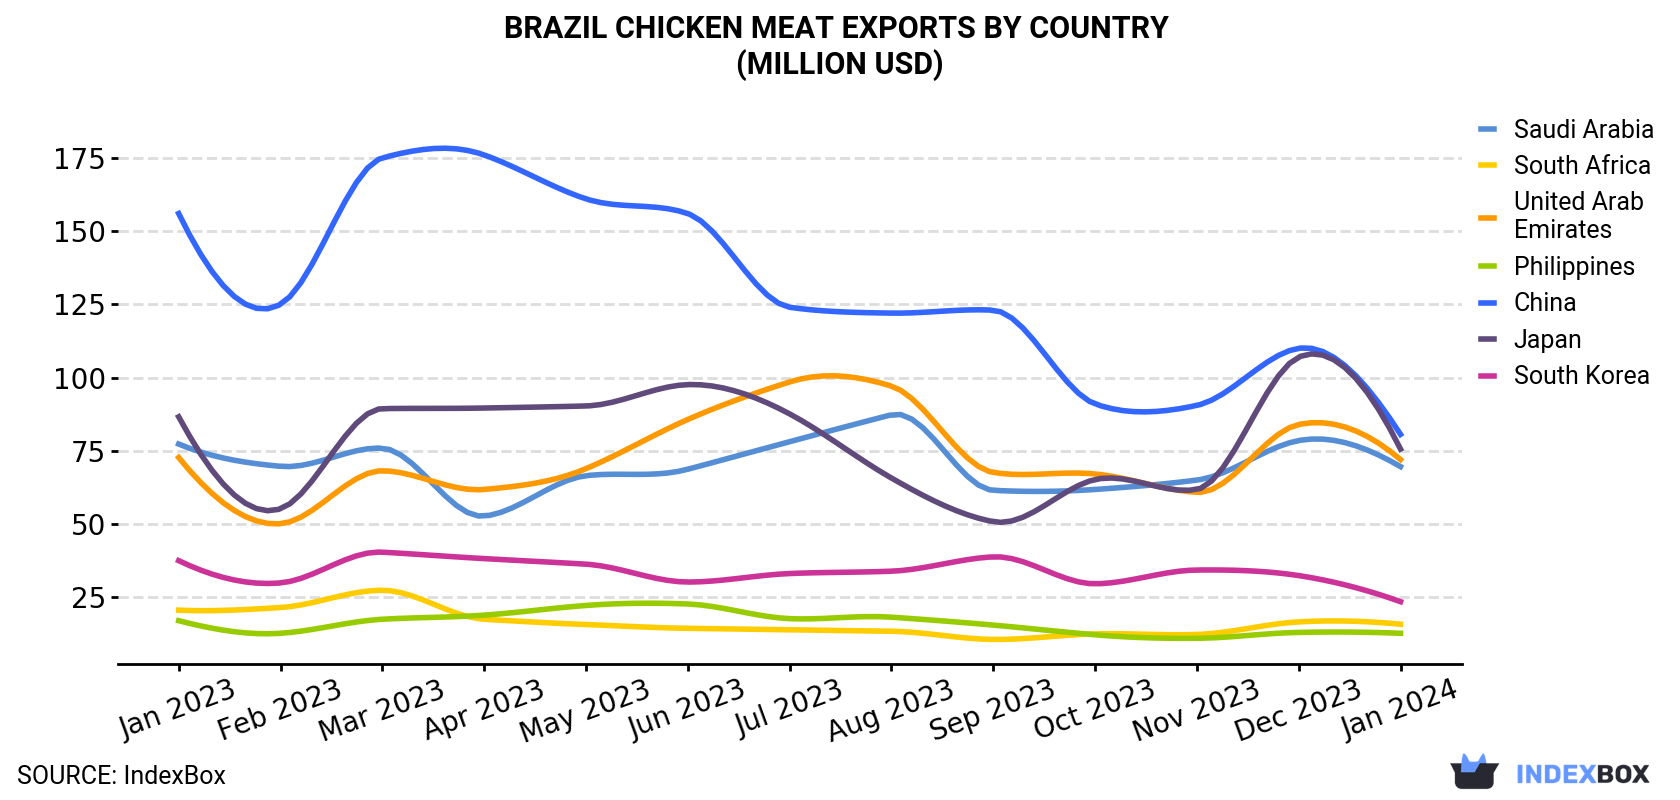 Brazil Chicken Meat Exports By Country (Million USD)